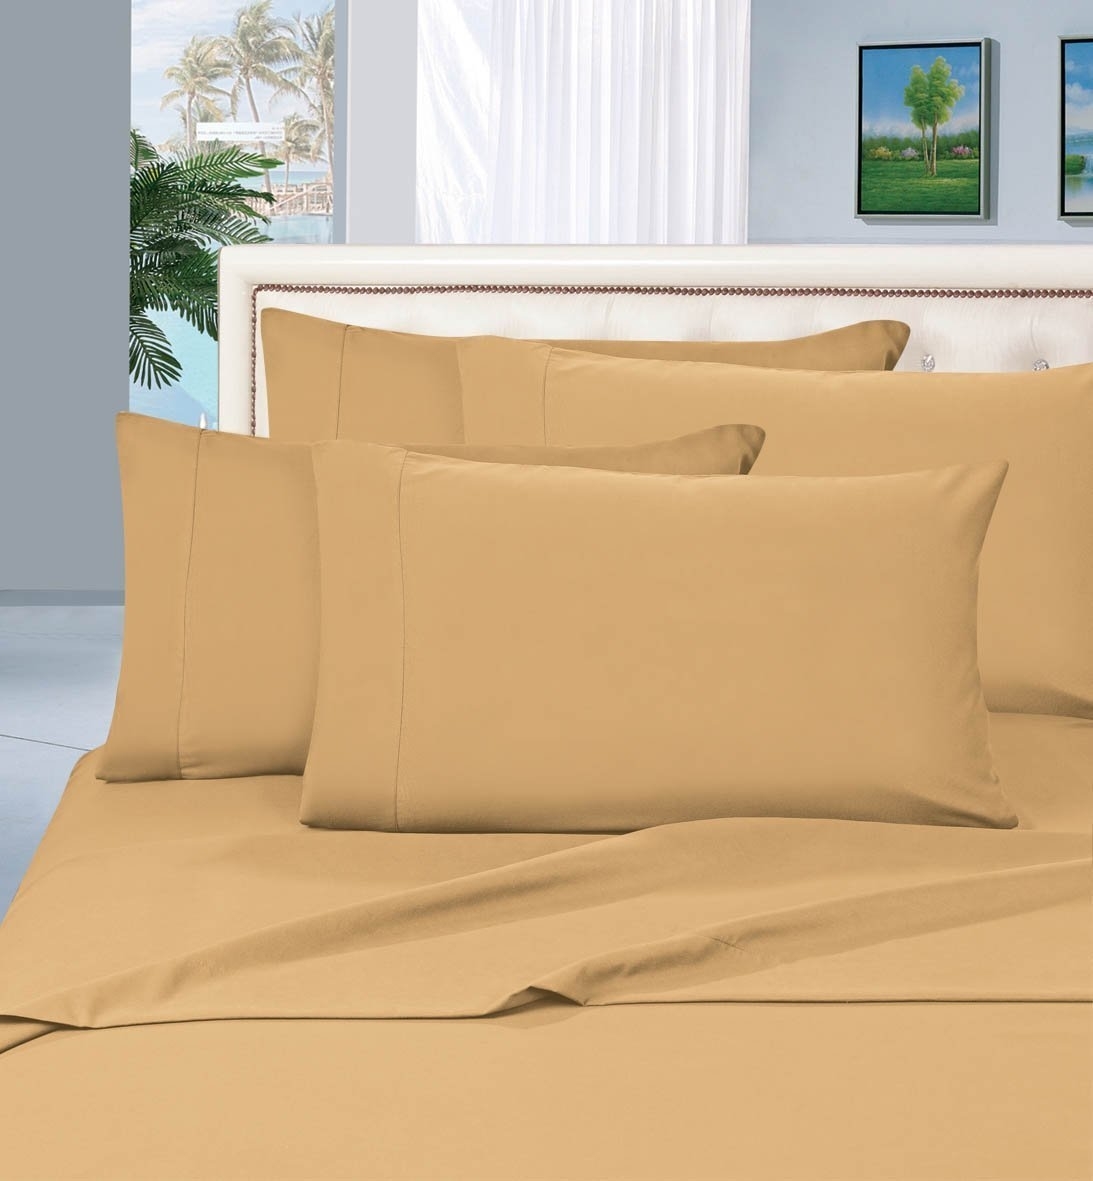 Elegant Comfort 1500 Series Wrinkle Resistant Egyptian Quality Hypoallergenic Ultra Soft Luxury 4-piece Bed Sheet Set, Full, Camel-gold